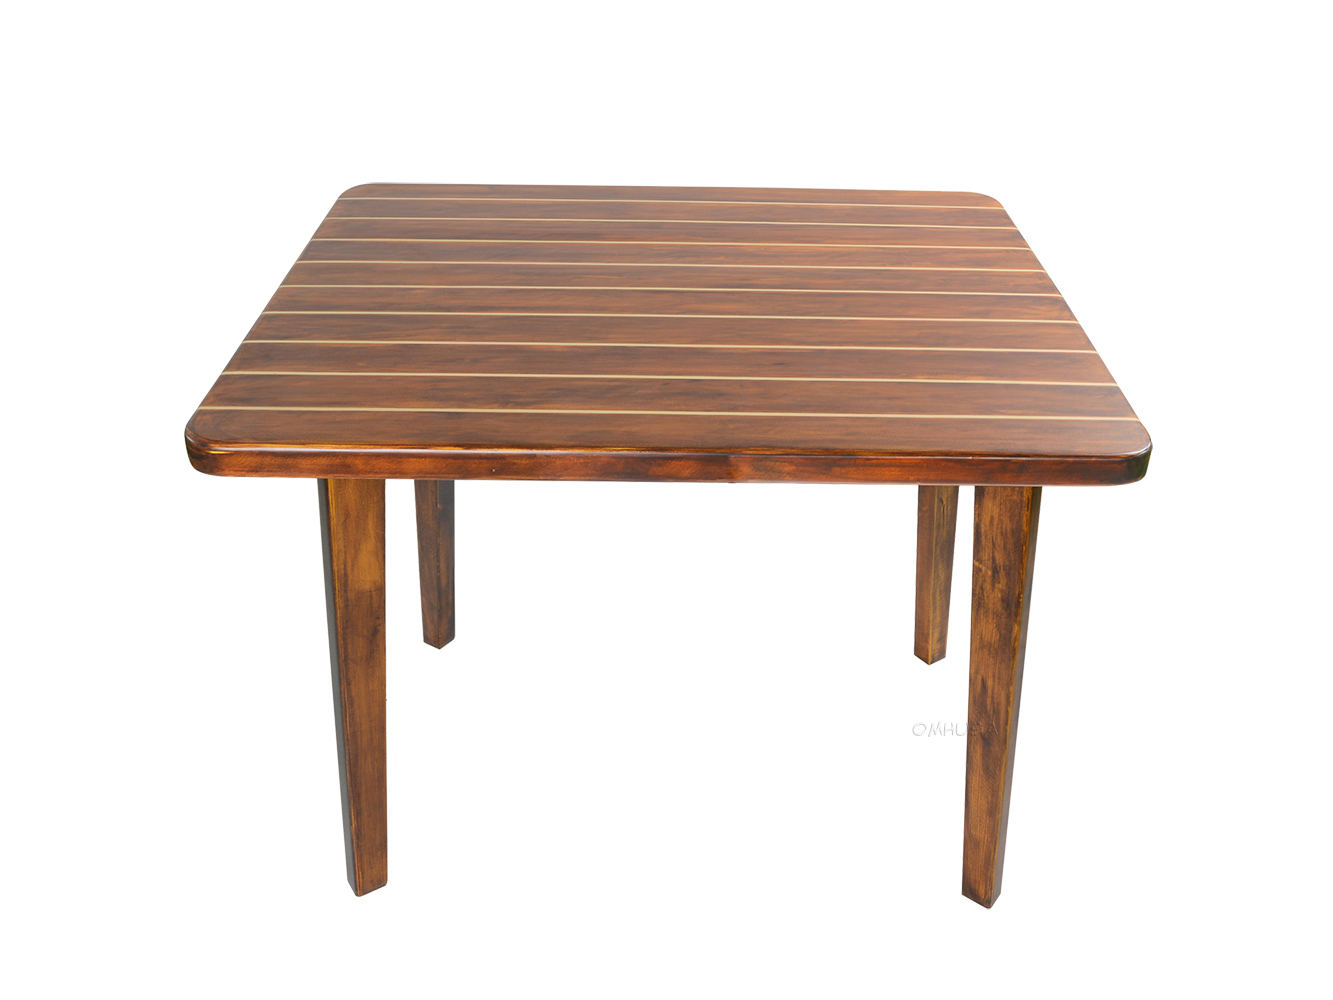 CF007 Nautical Table With Inlay Wood Stripes Small cf007-nautical-table-with-inlay-wood-stripes-small-l01.jpg